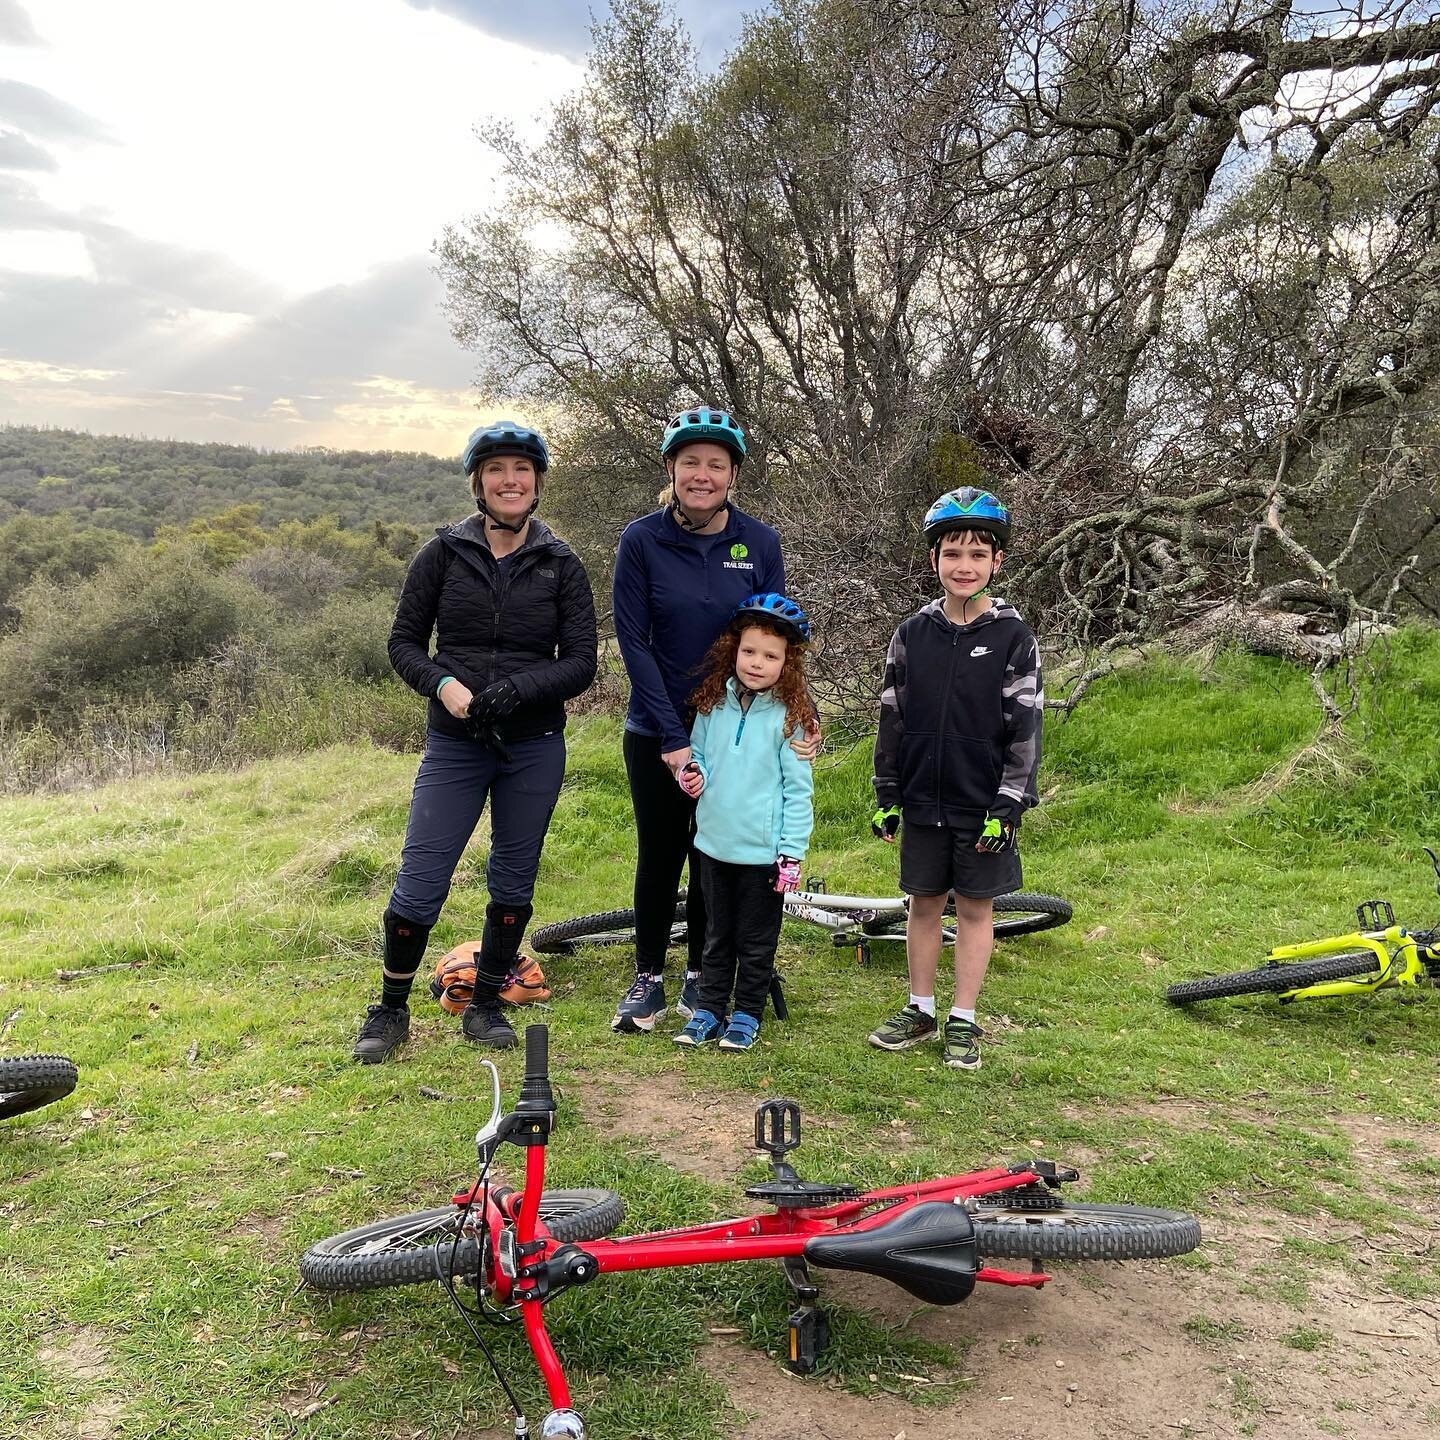 A beautiful evening to give private lessons to these awesome three!! I&rsquo;m putting money on the little one becoming the next Rachel Atherton! She was 🔥 #mtbgirl #mtbskills #mtbkids #morekidsonbikes #nextrachelatherton #ridebikesbehappy